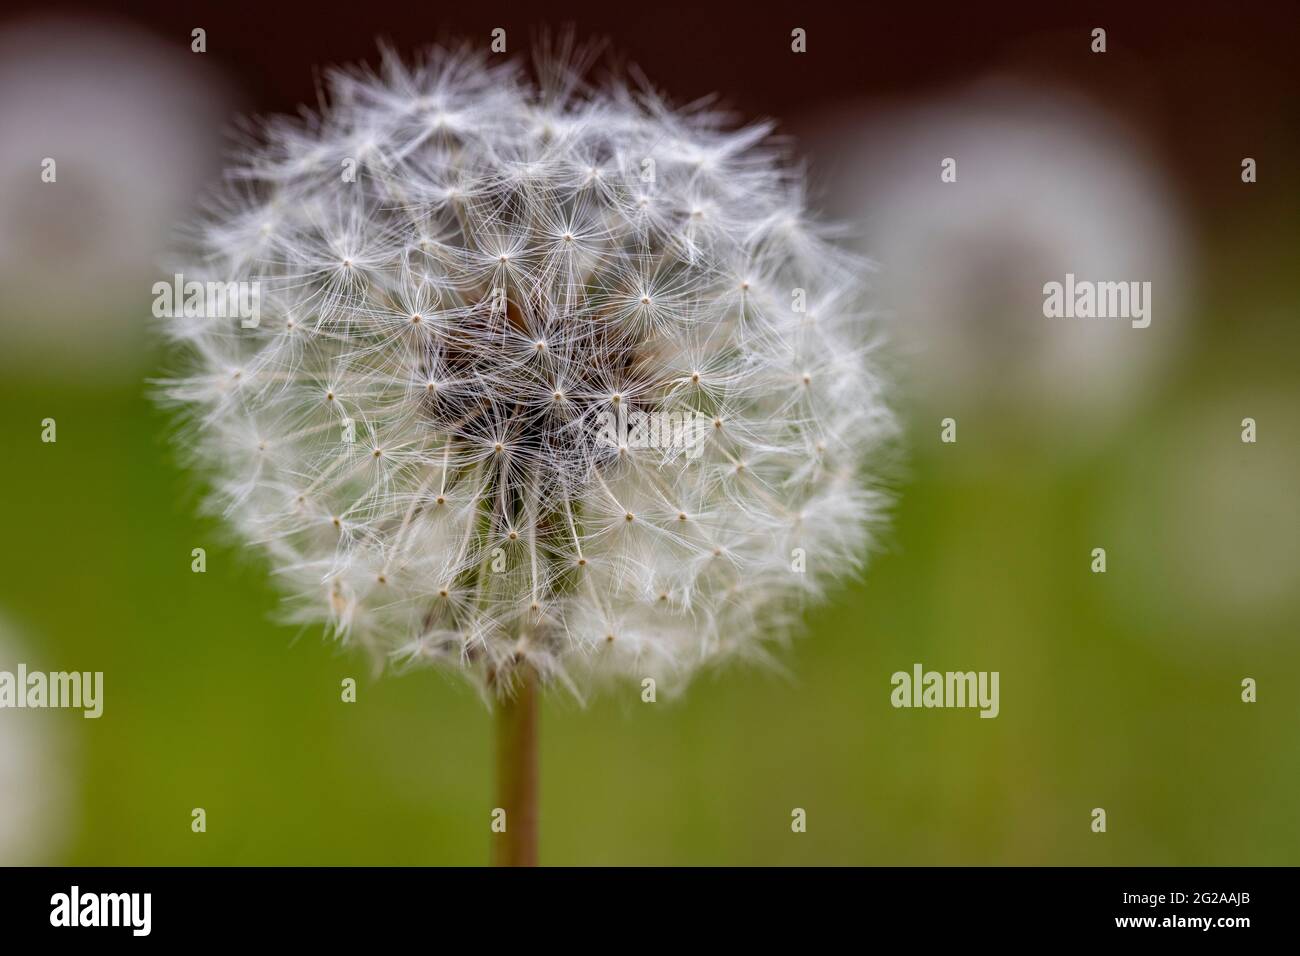 Dandelion growing in the meadow. A plant whose seeds are carried by the wind. Spring season. Stock Photo